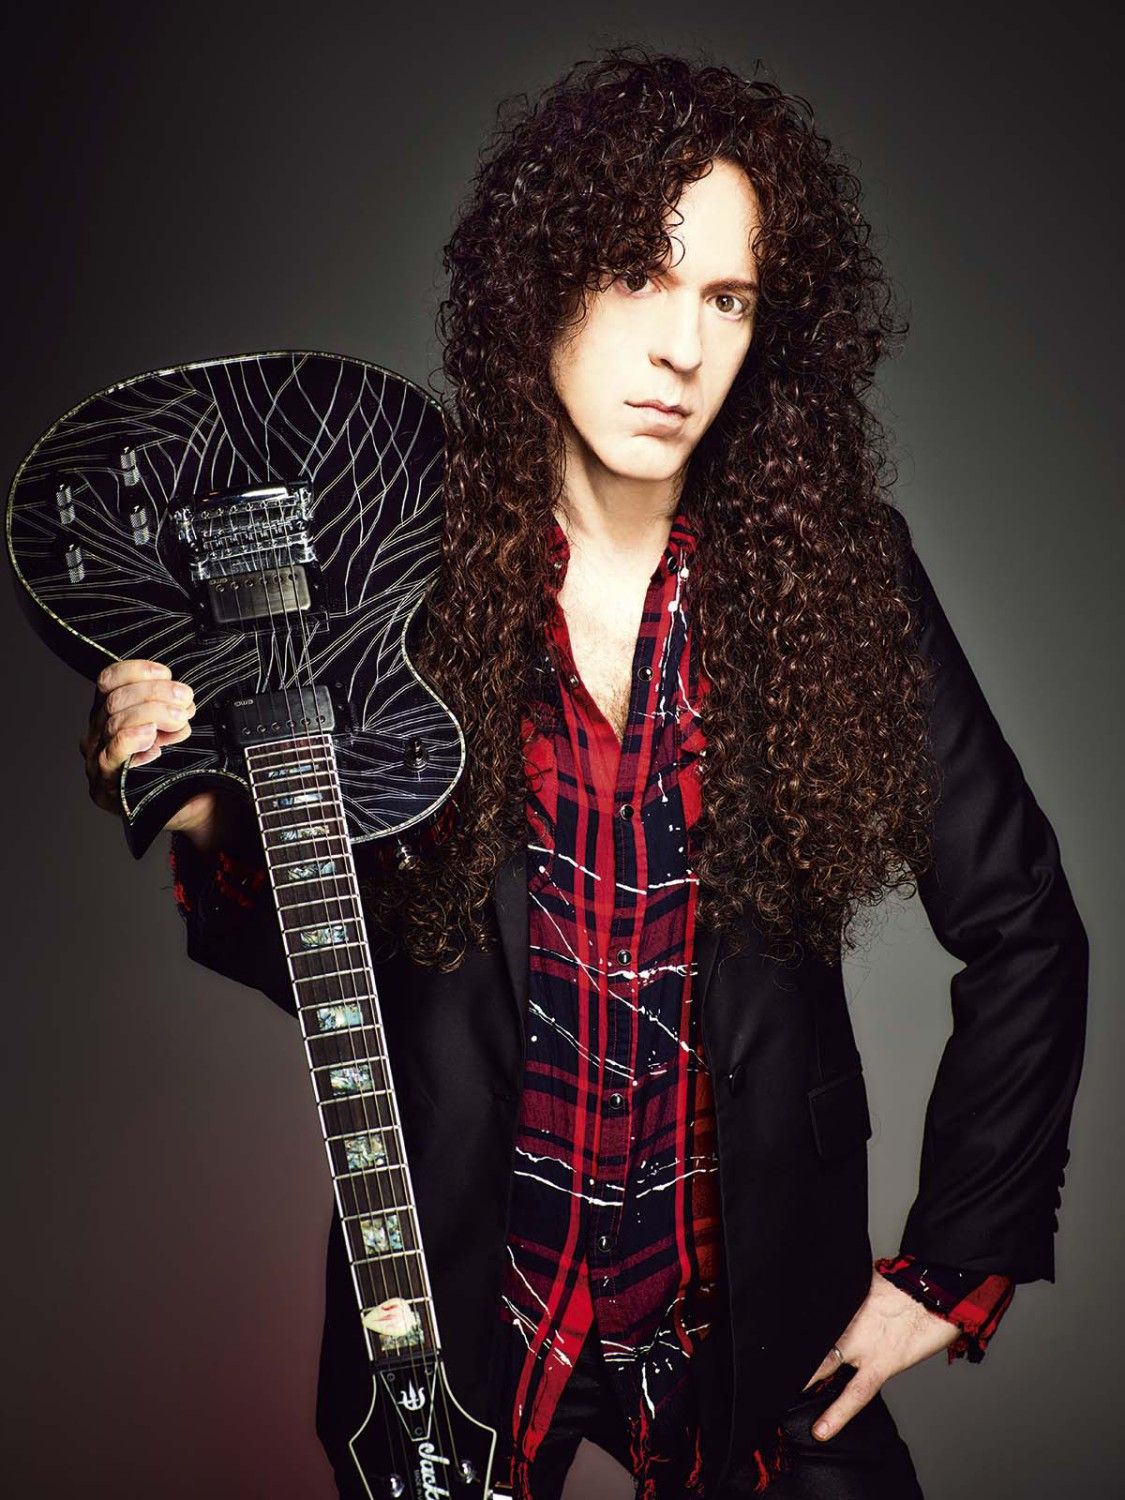 VOICES FROM THE RISING SUN: Marty Friedman